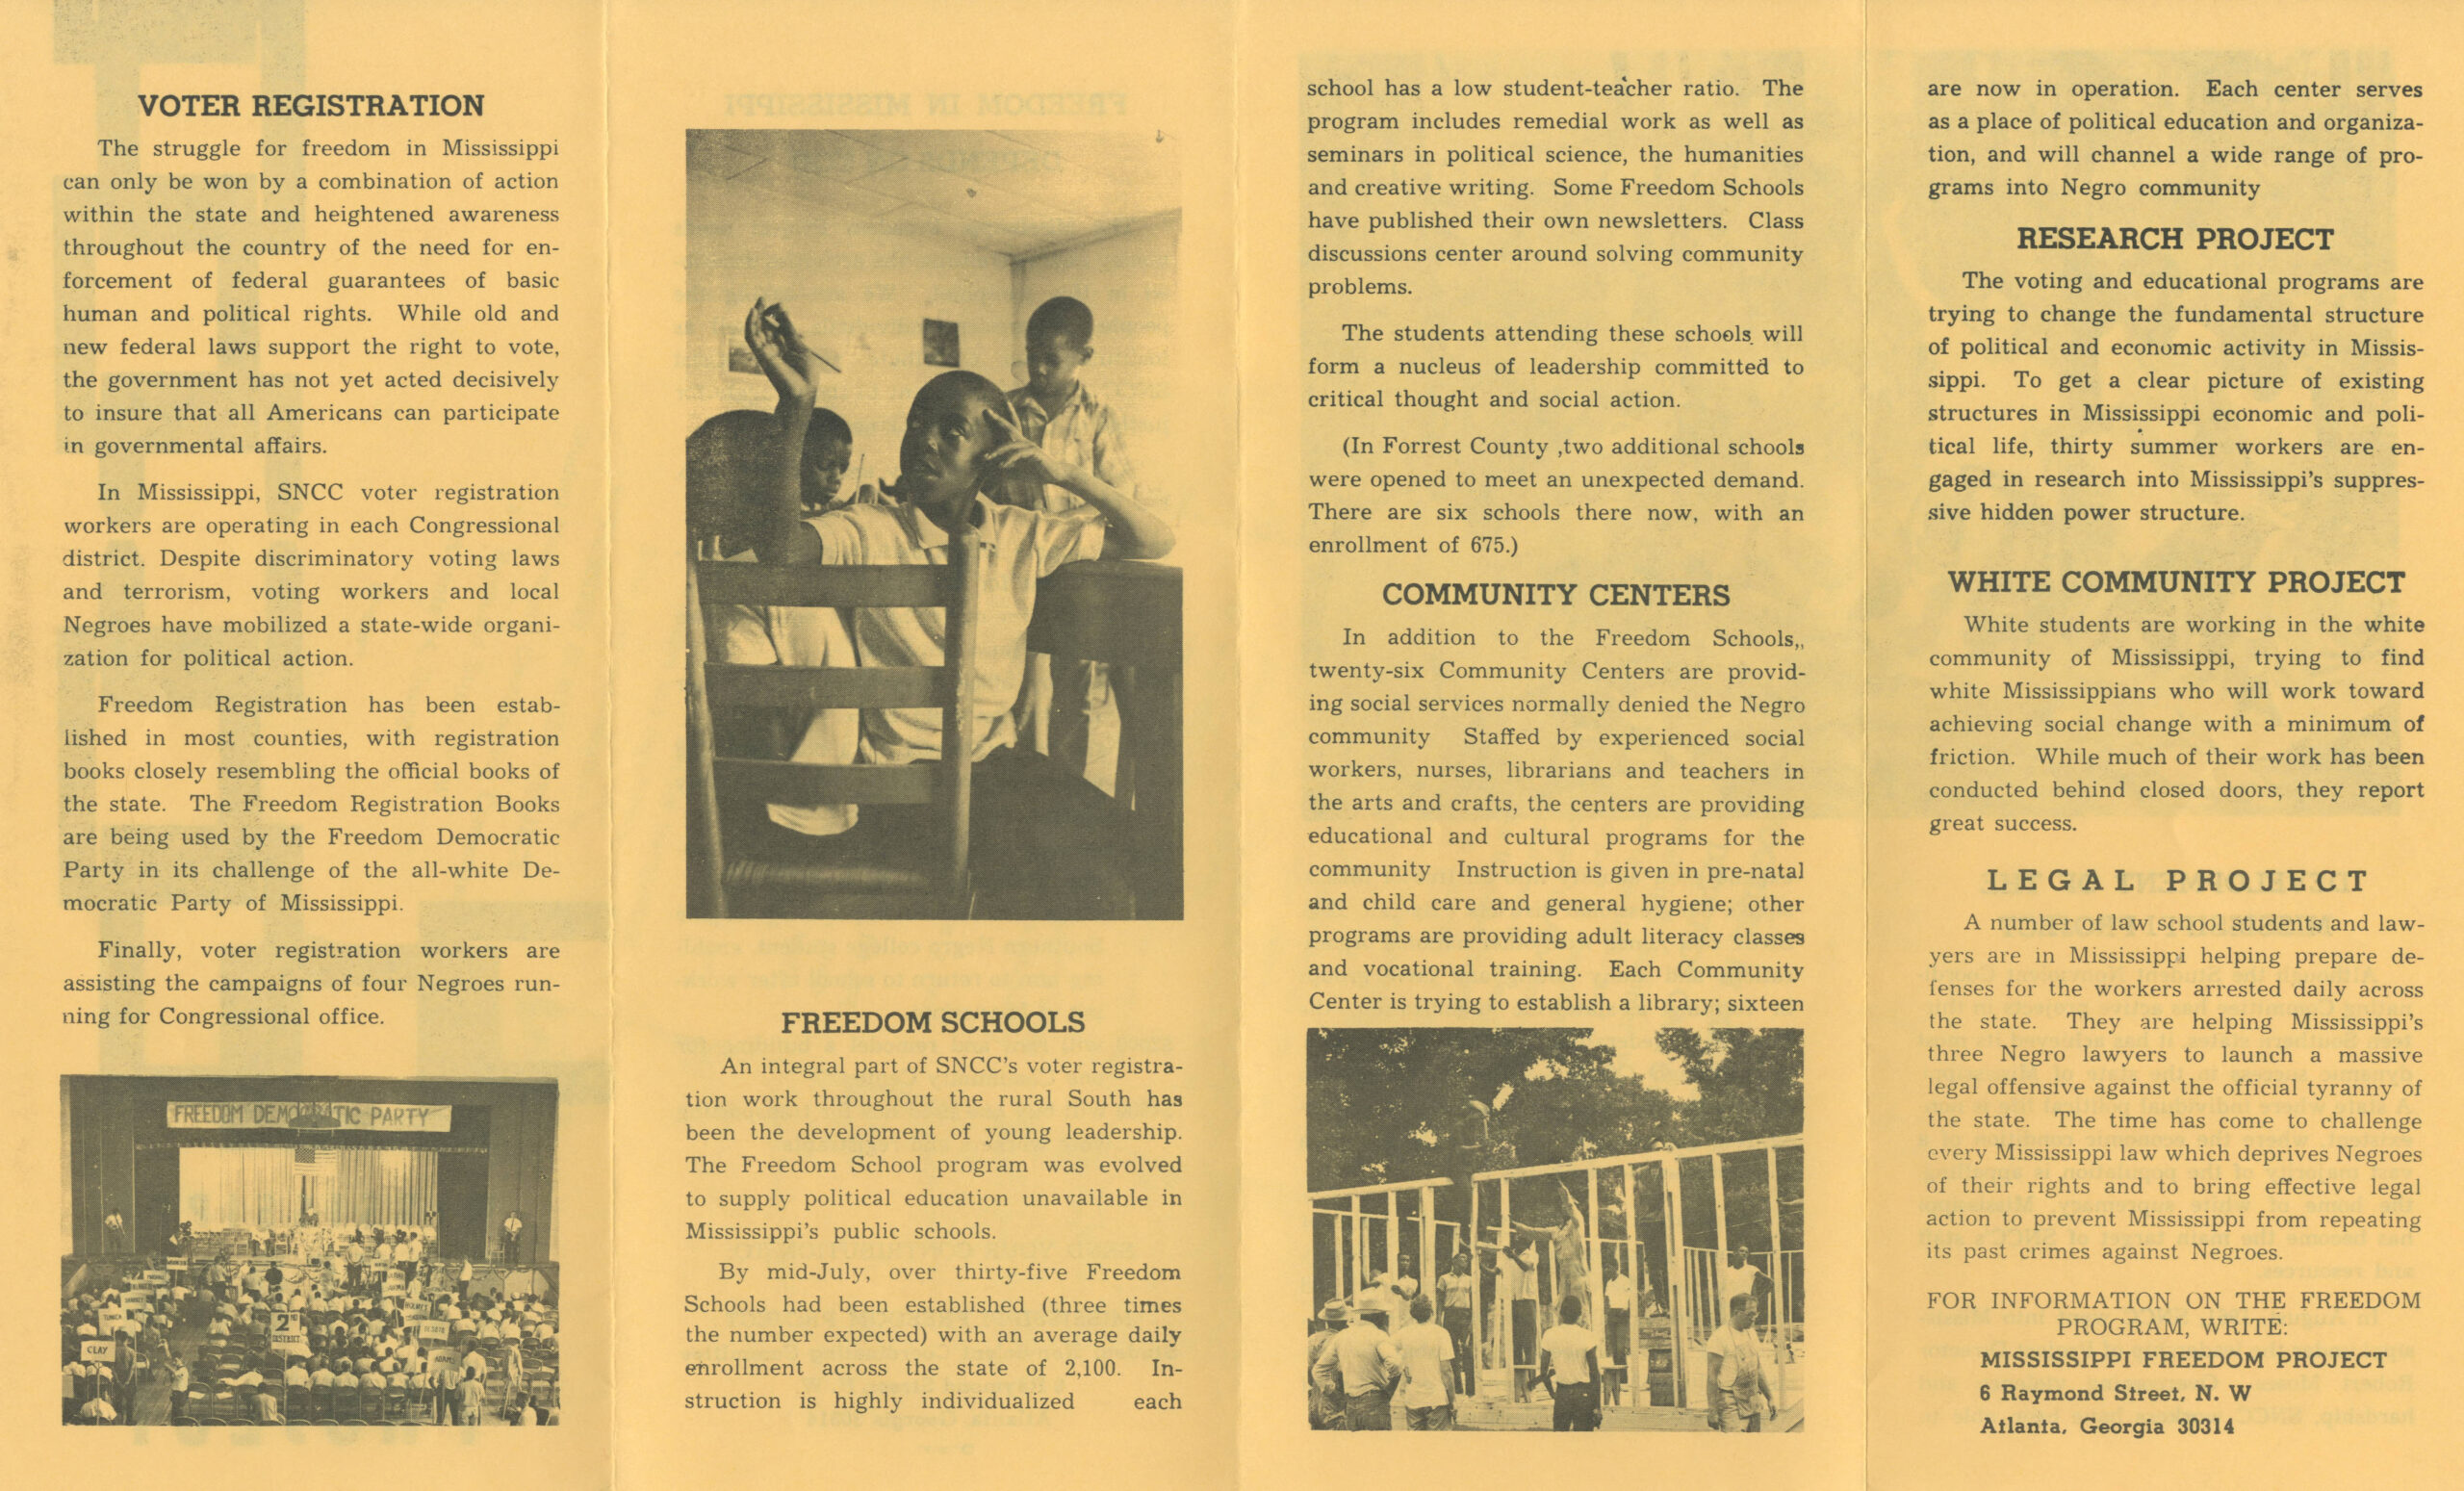 Page 3 of the Mississippi Freedom Project Pamphlet